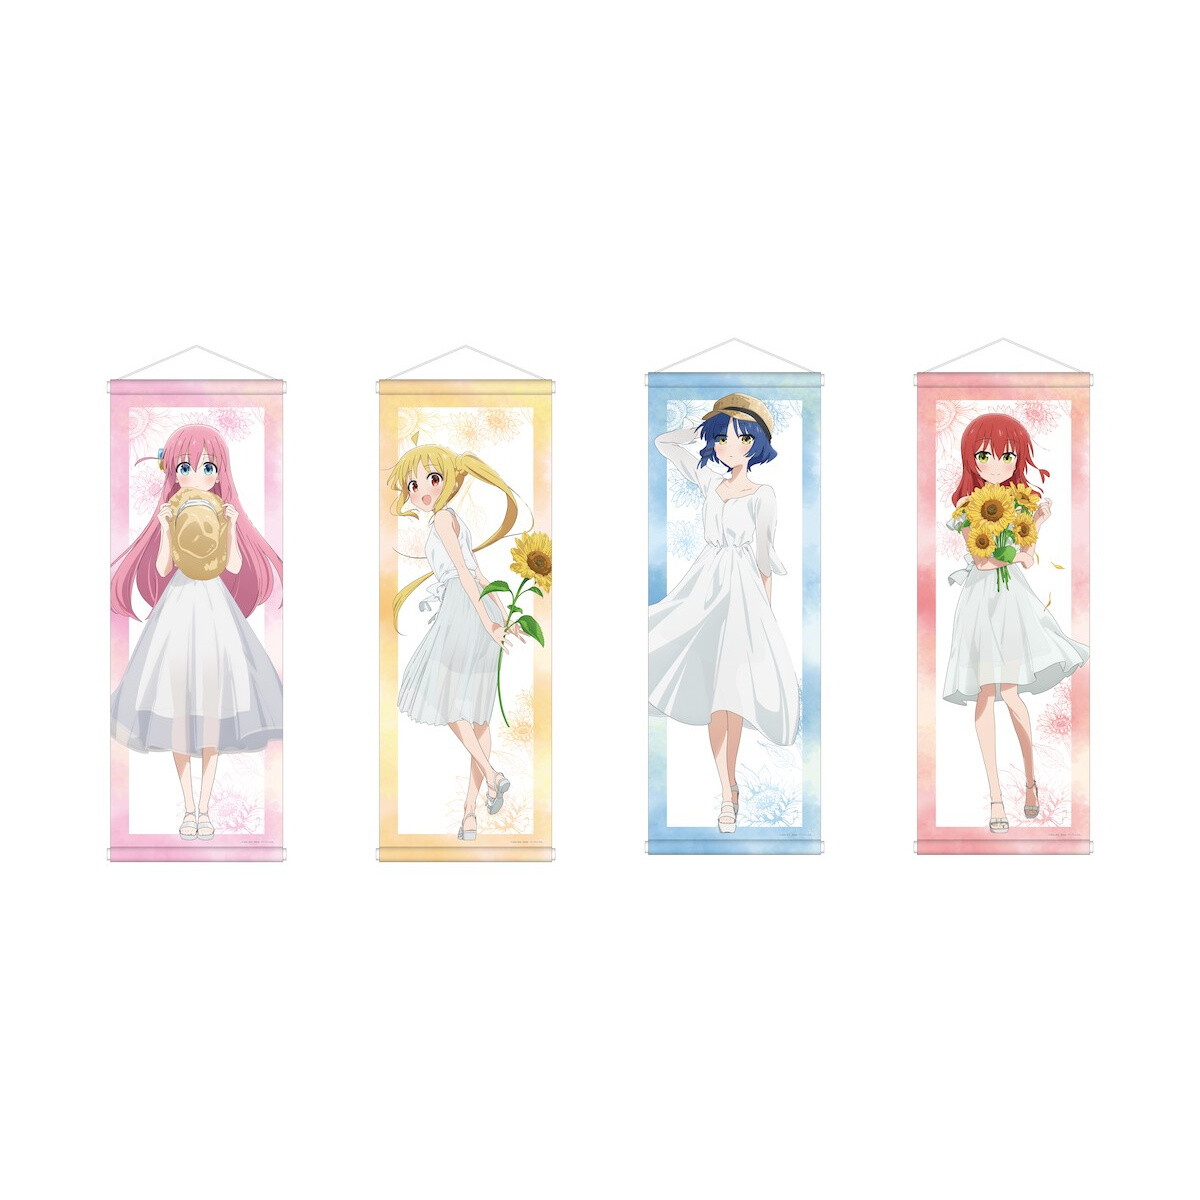 CDJapan : Motto To Love-Ru - Trouble - B2 Tapestry Character Goods